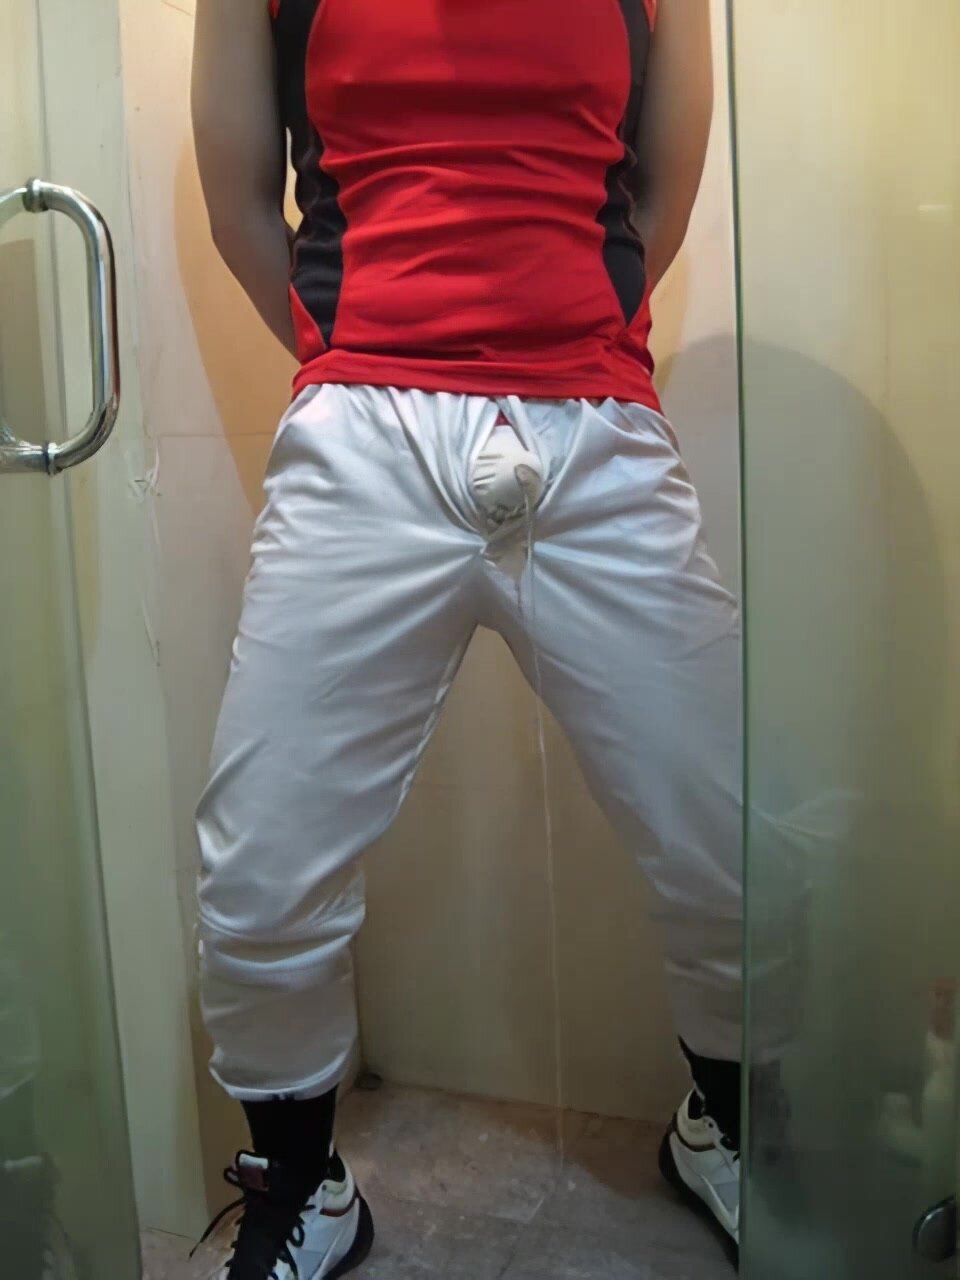 Pissing through silky pants and fucking through briefs